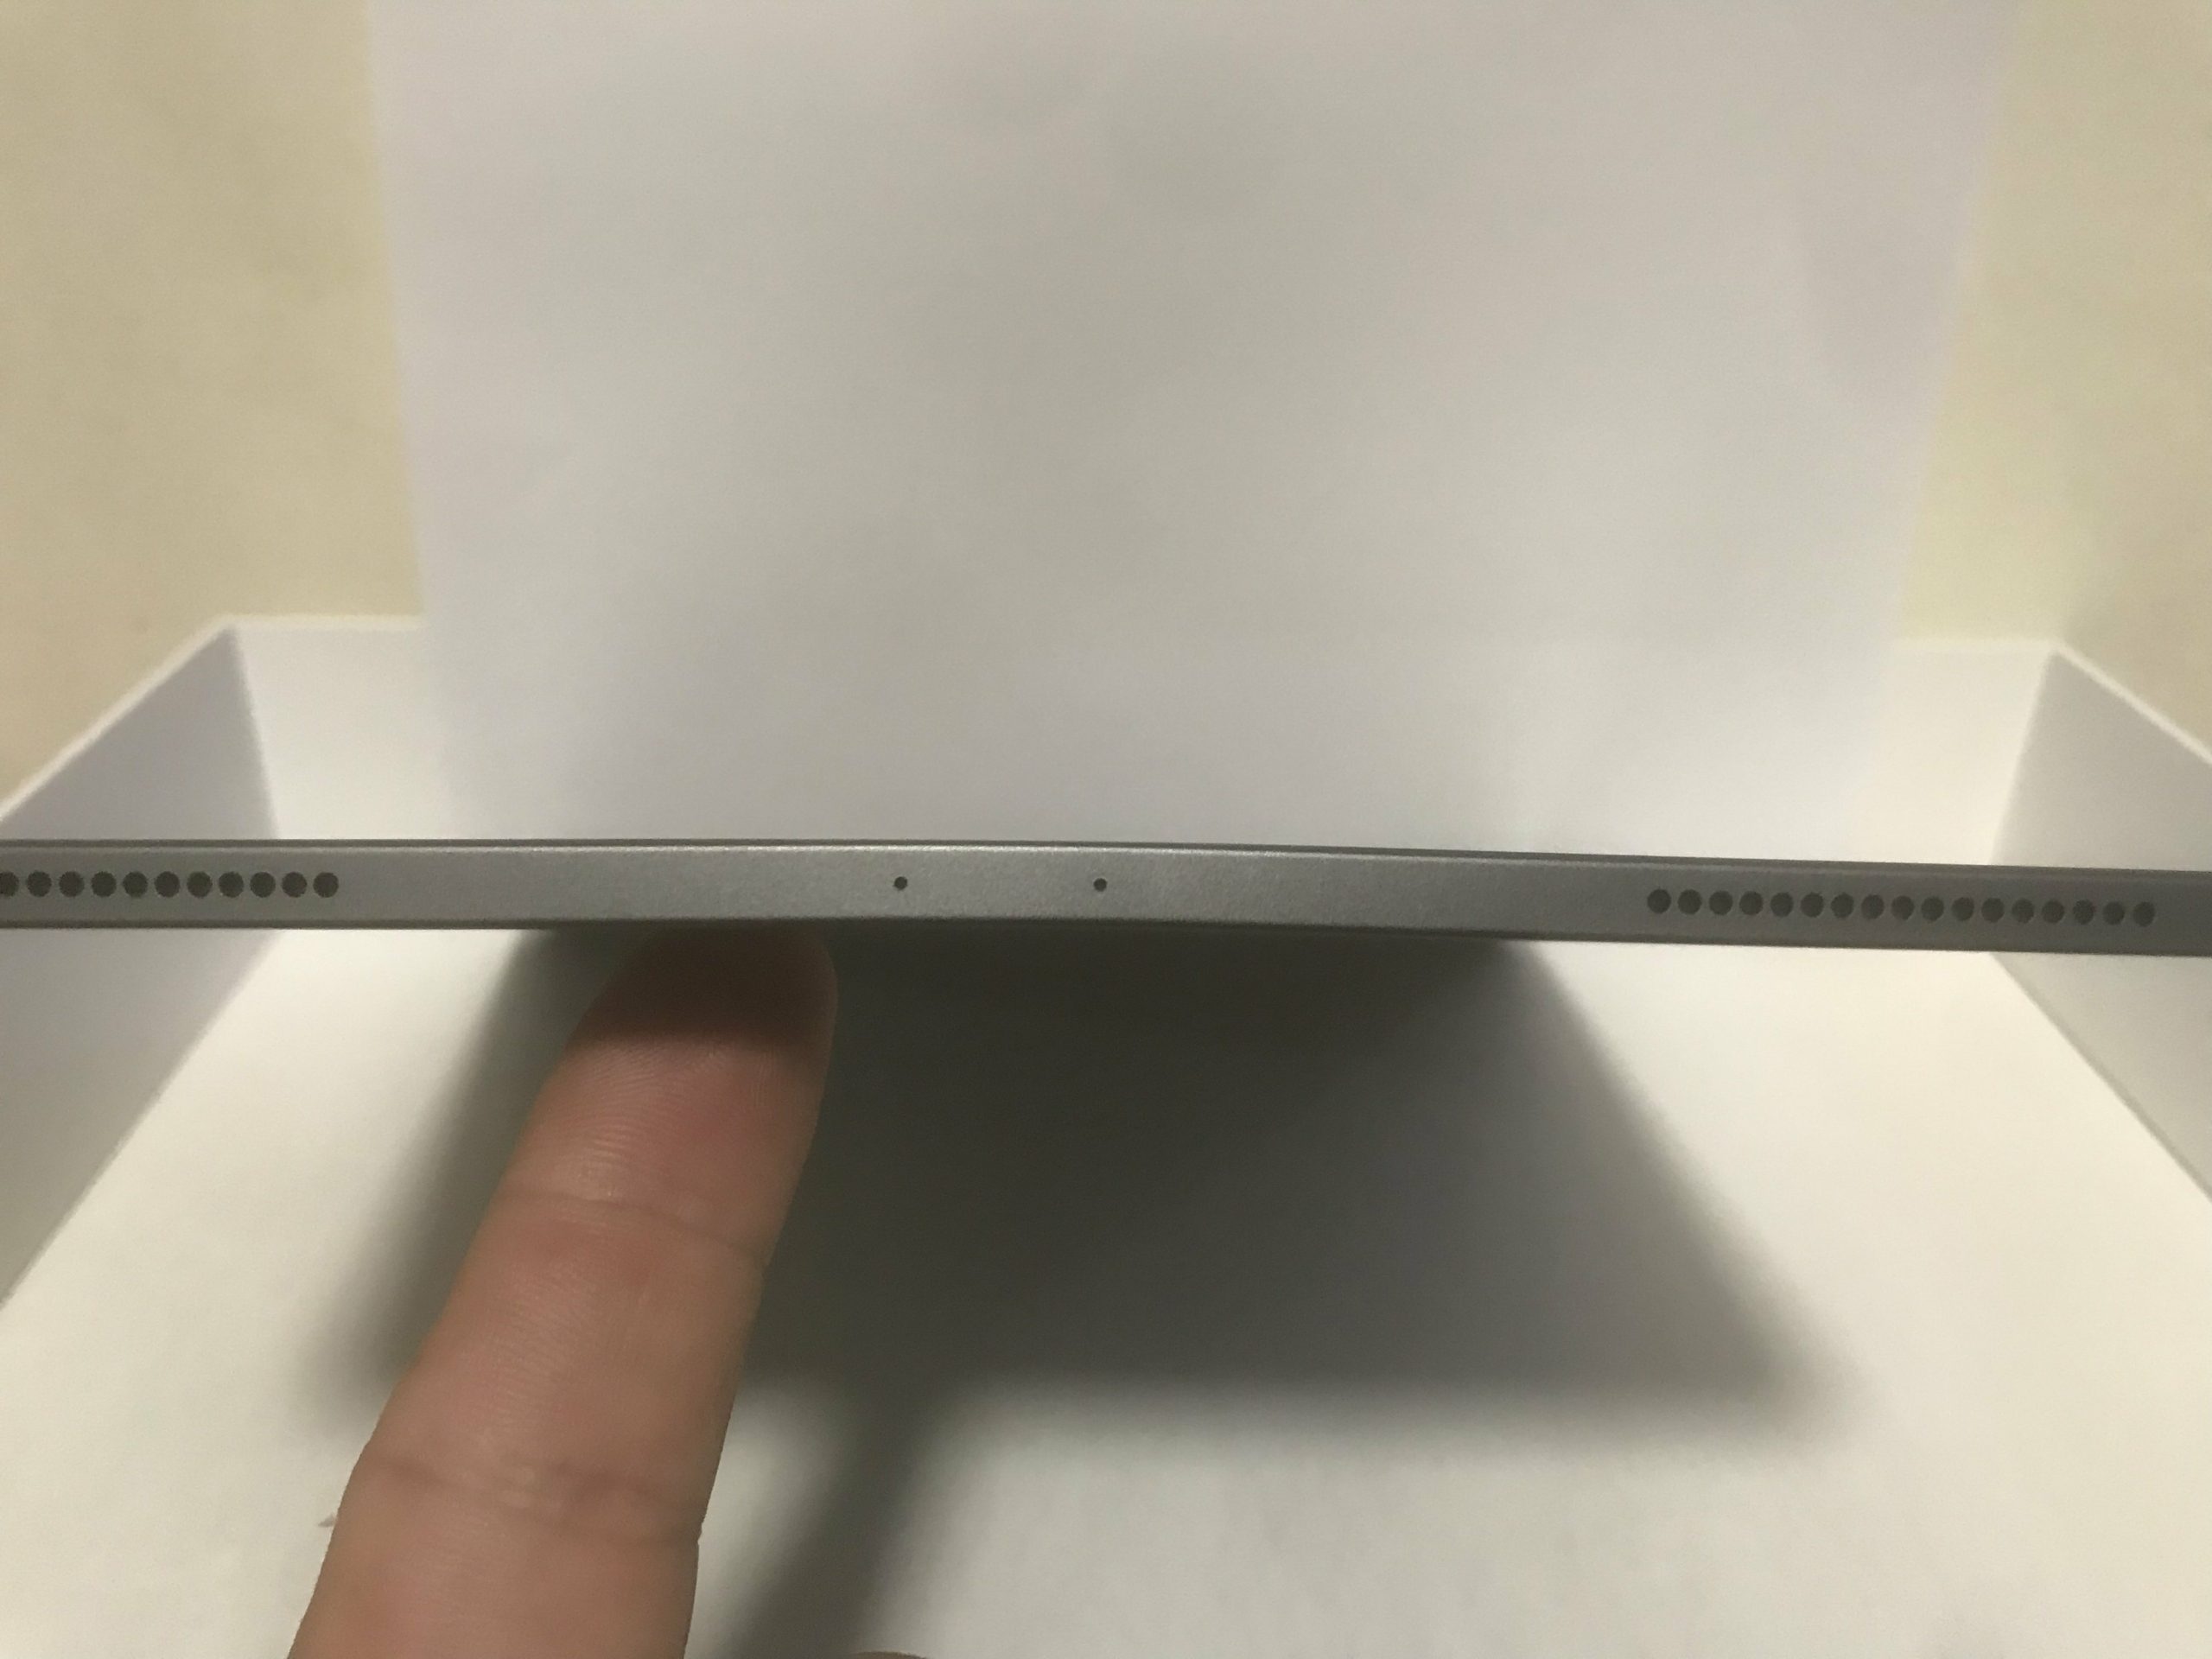 ipad pro geplooid chassis